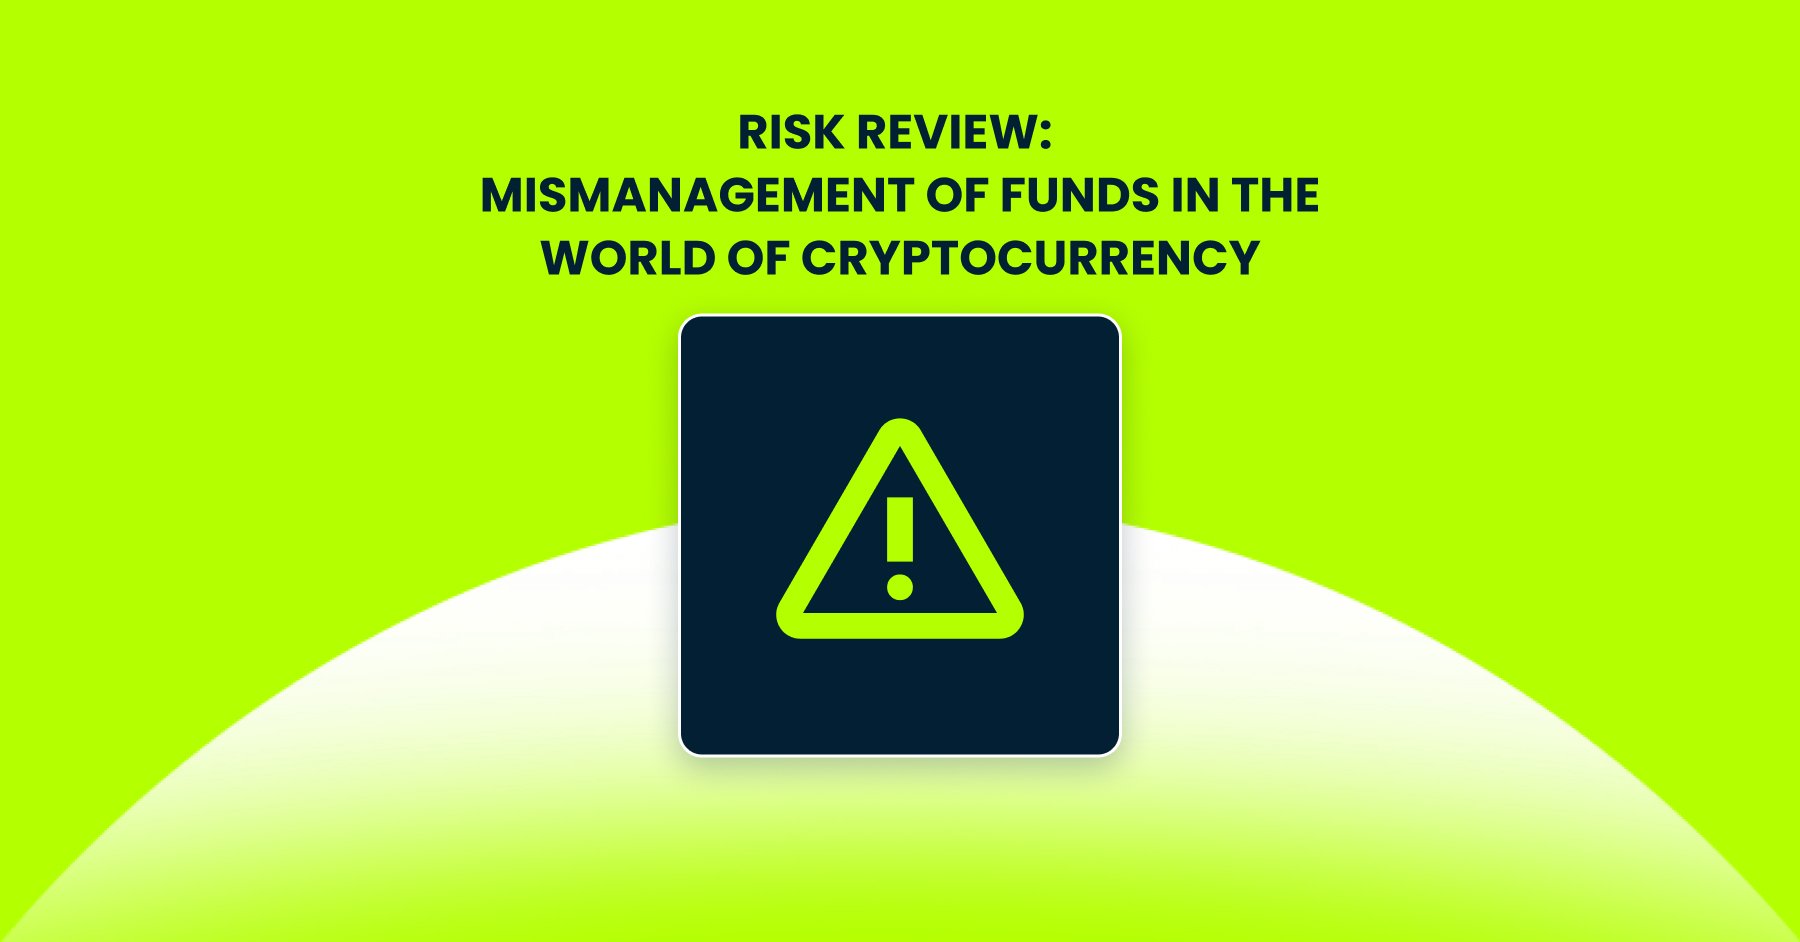 Risk review: Mismanagement of Funds in the world of cryptocurrency